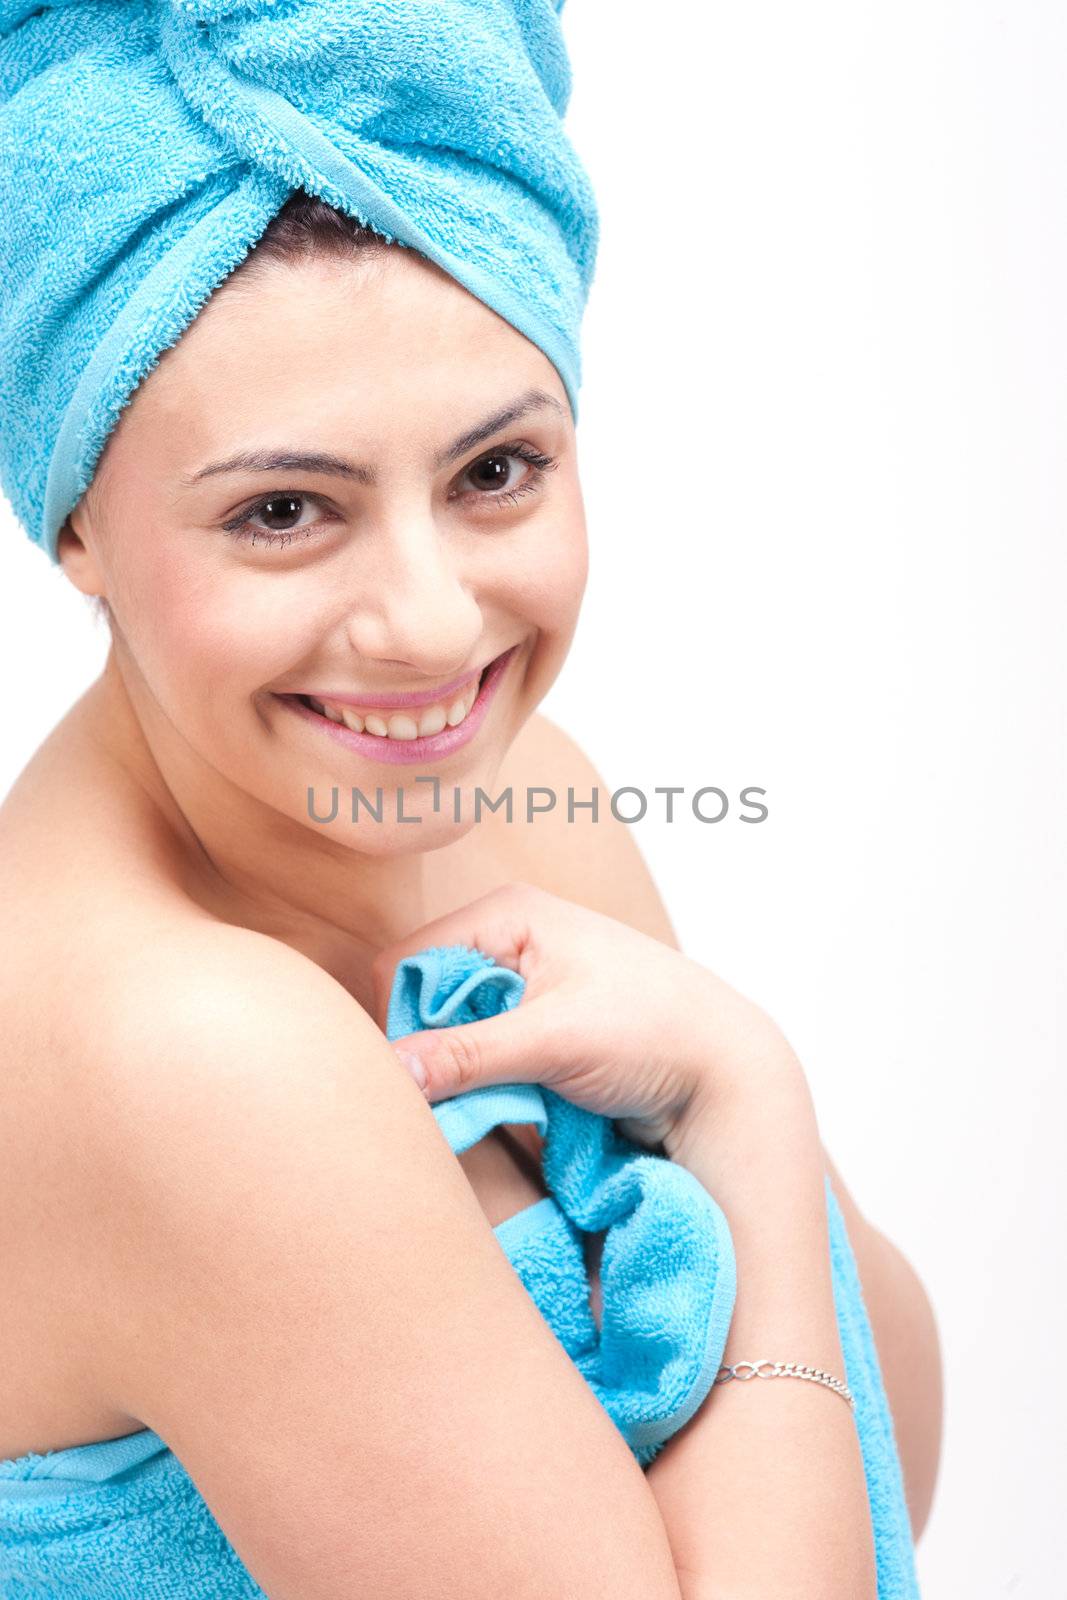 young beautiful woman with a towel doing wellness